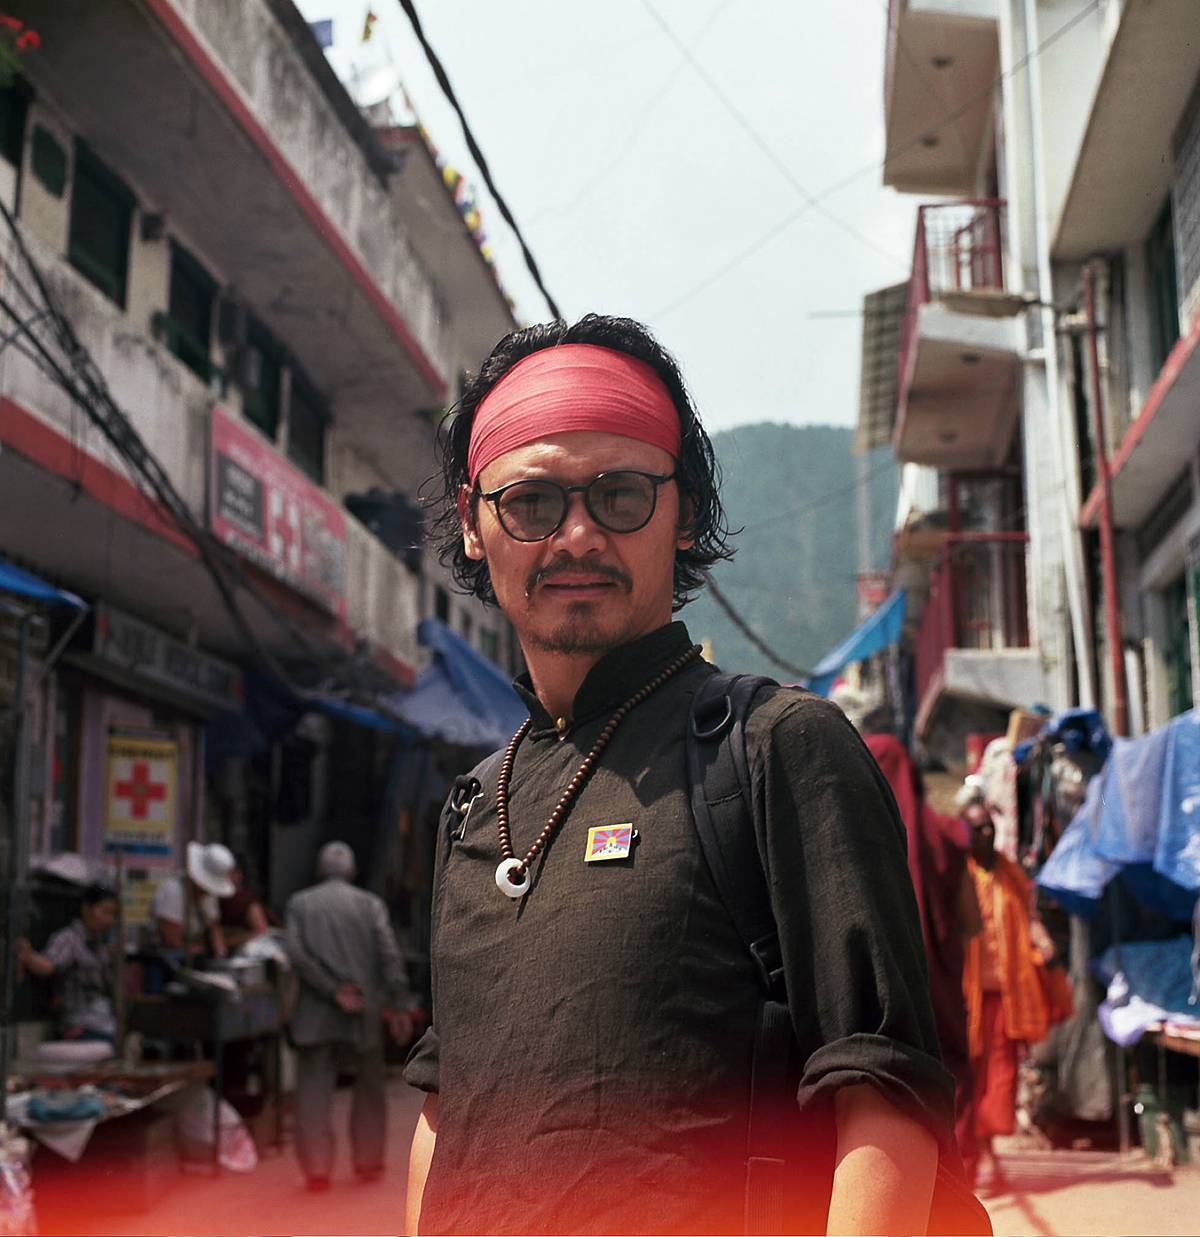 “In the Tibetan community, people refuse to think politically”: An Interview with Tibetan Writer and Activist, Tenzin Tsundue